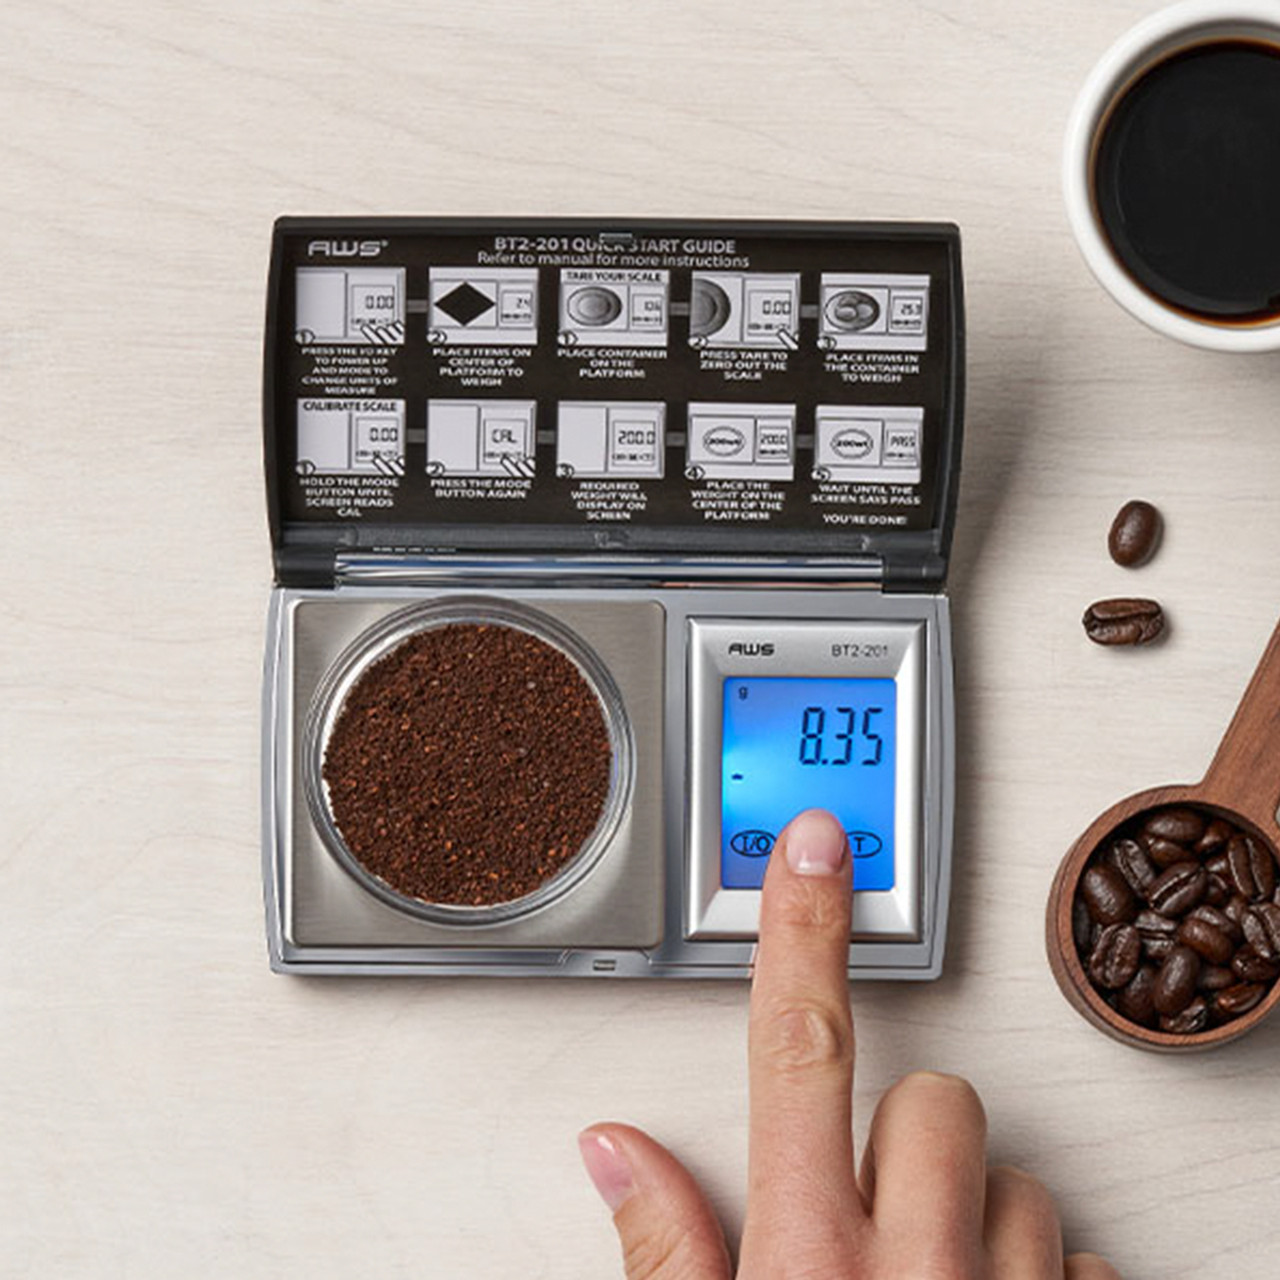 Coffee scale RGB color icon. Appliance for measuring beans weight